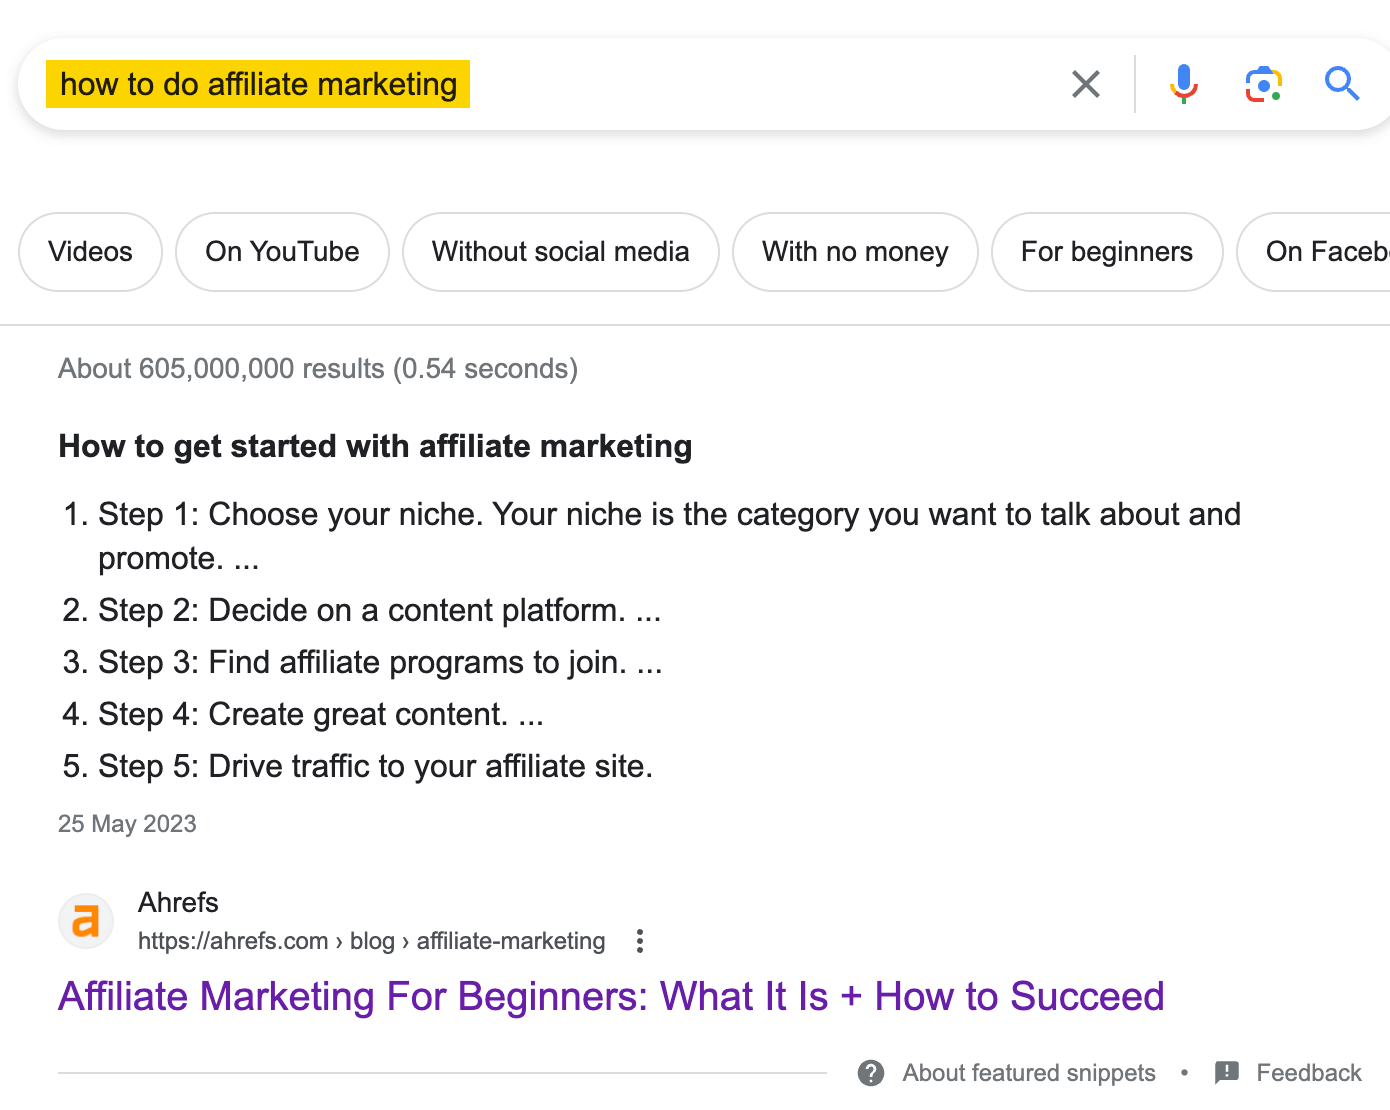 Ahrefs ranking #1 on a Google SERP for "how to do affiliate marketing"
